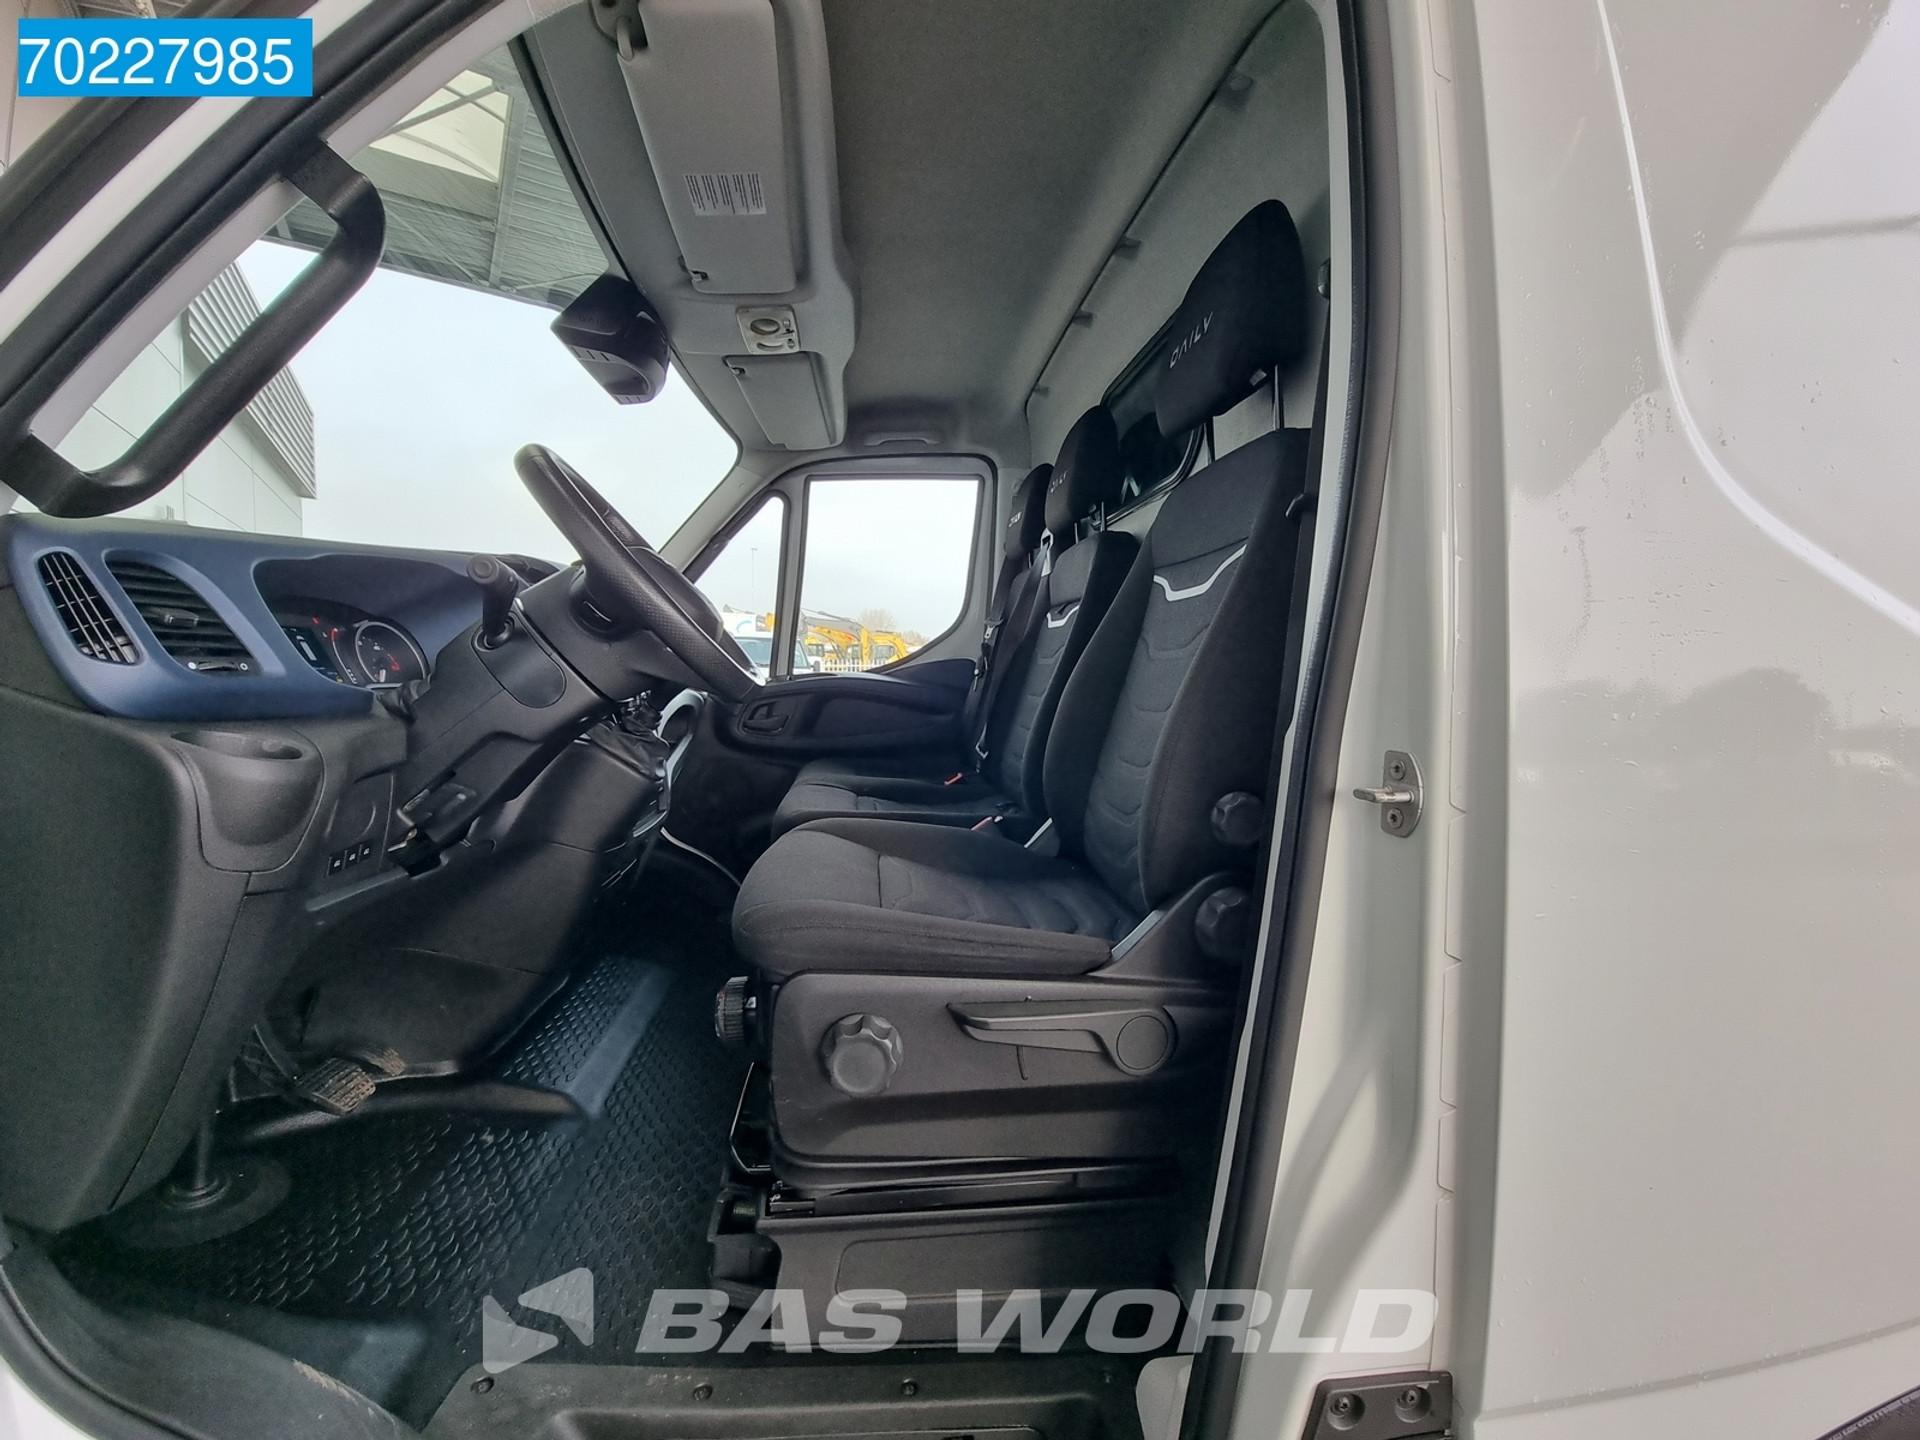 Foto 18 van Iveco Daily 35S14 Automaat Luchtvering ACC Camera LED Airco L3H2 L4H2 16m3 Airco